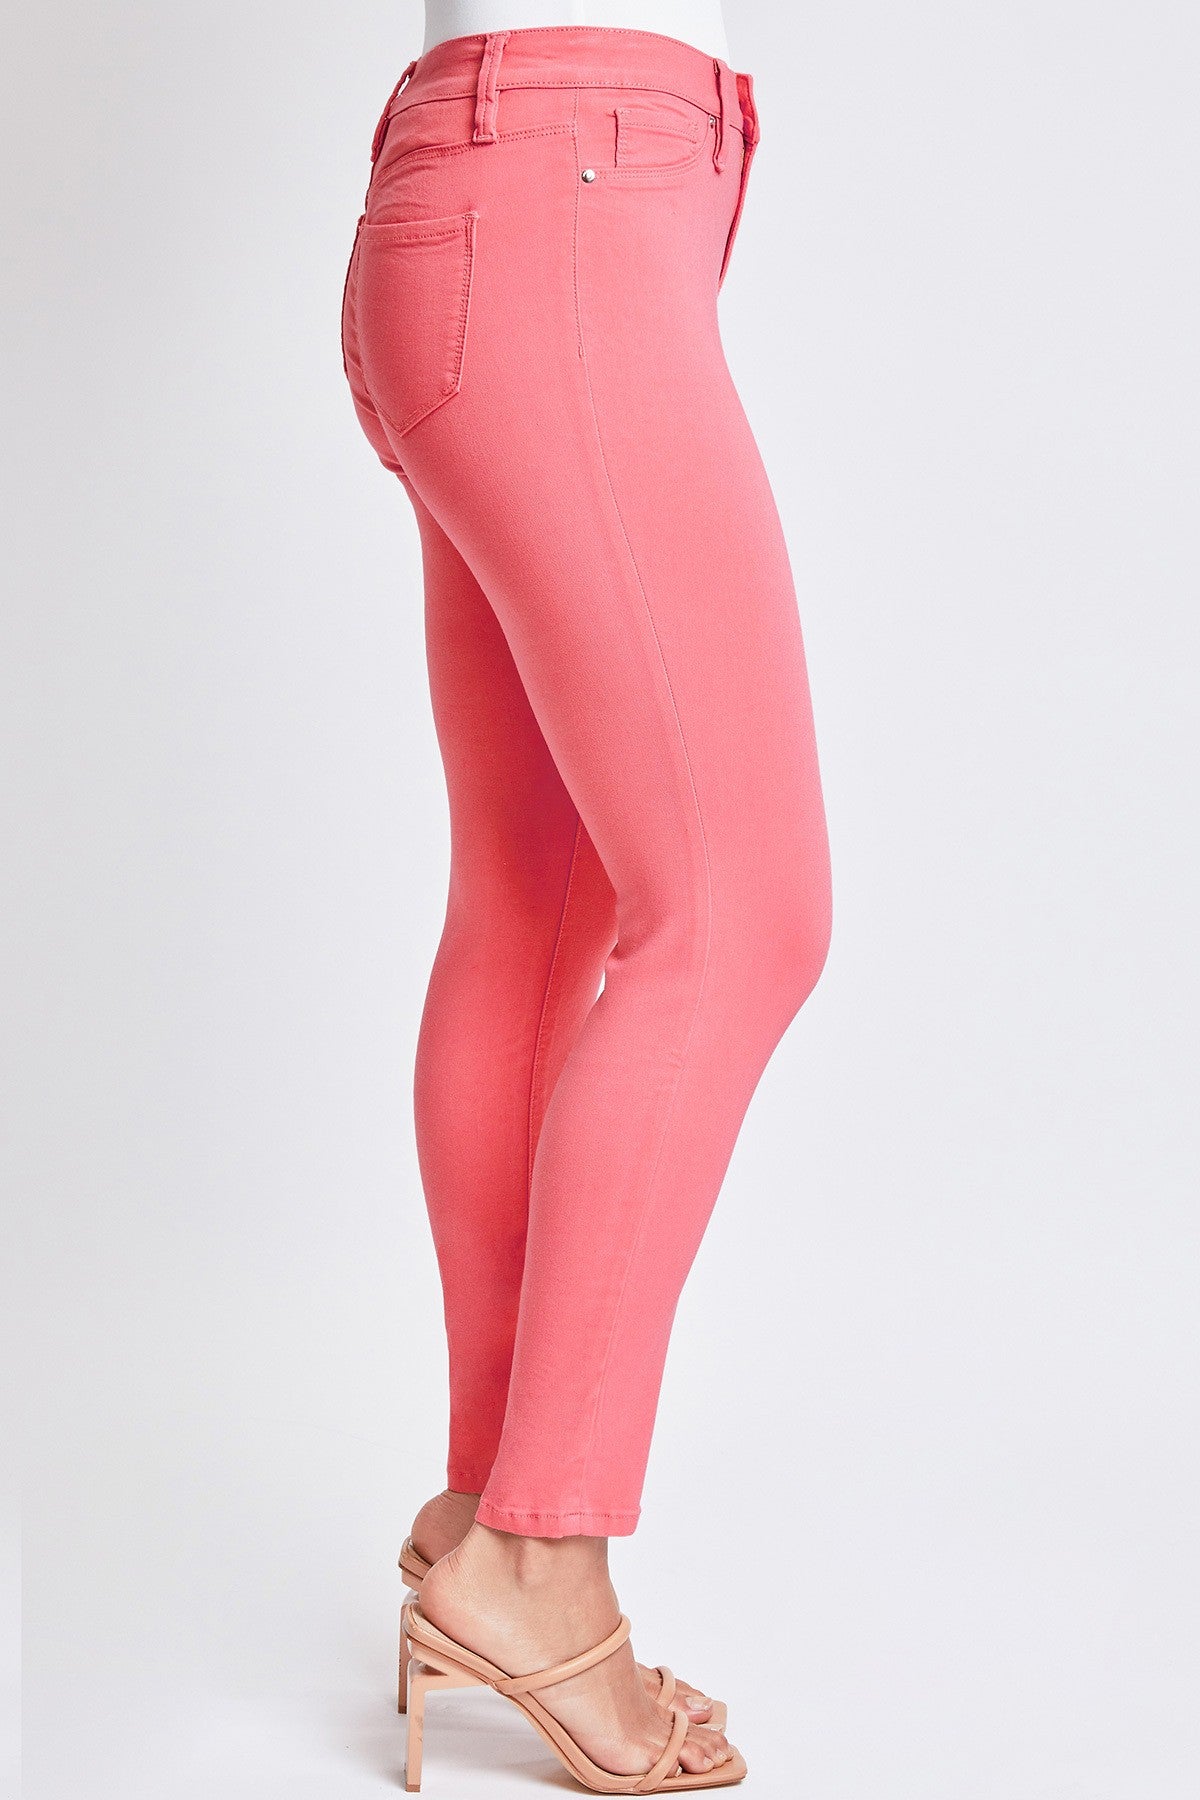 Shell Pink YMI Hyperstretch Jeans